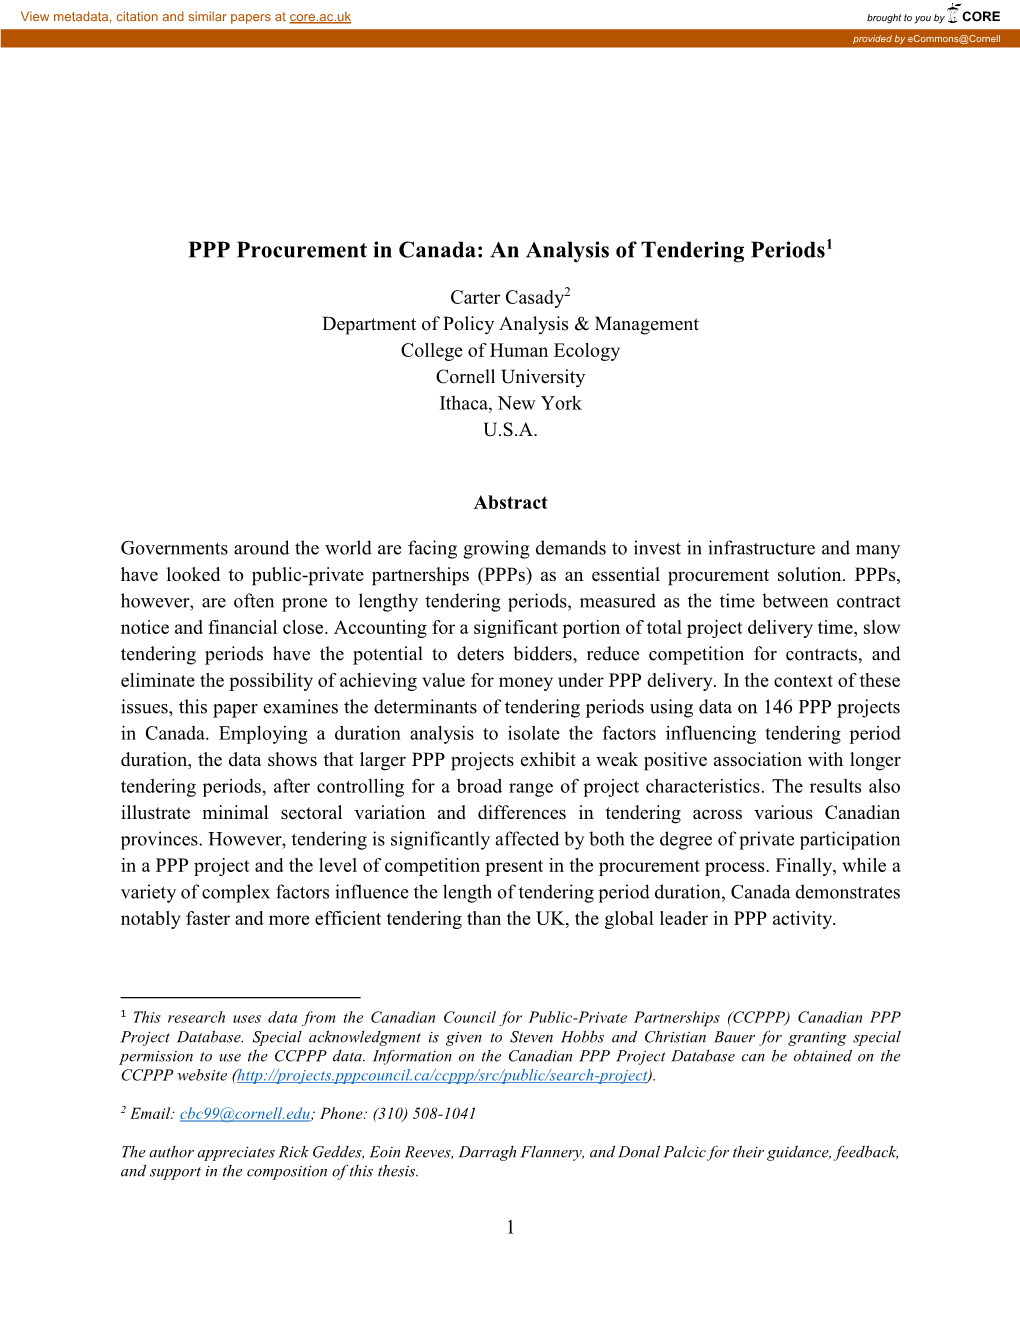 PPP Procurement in Canada: an Analysis of Tendering Periods1